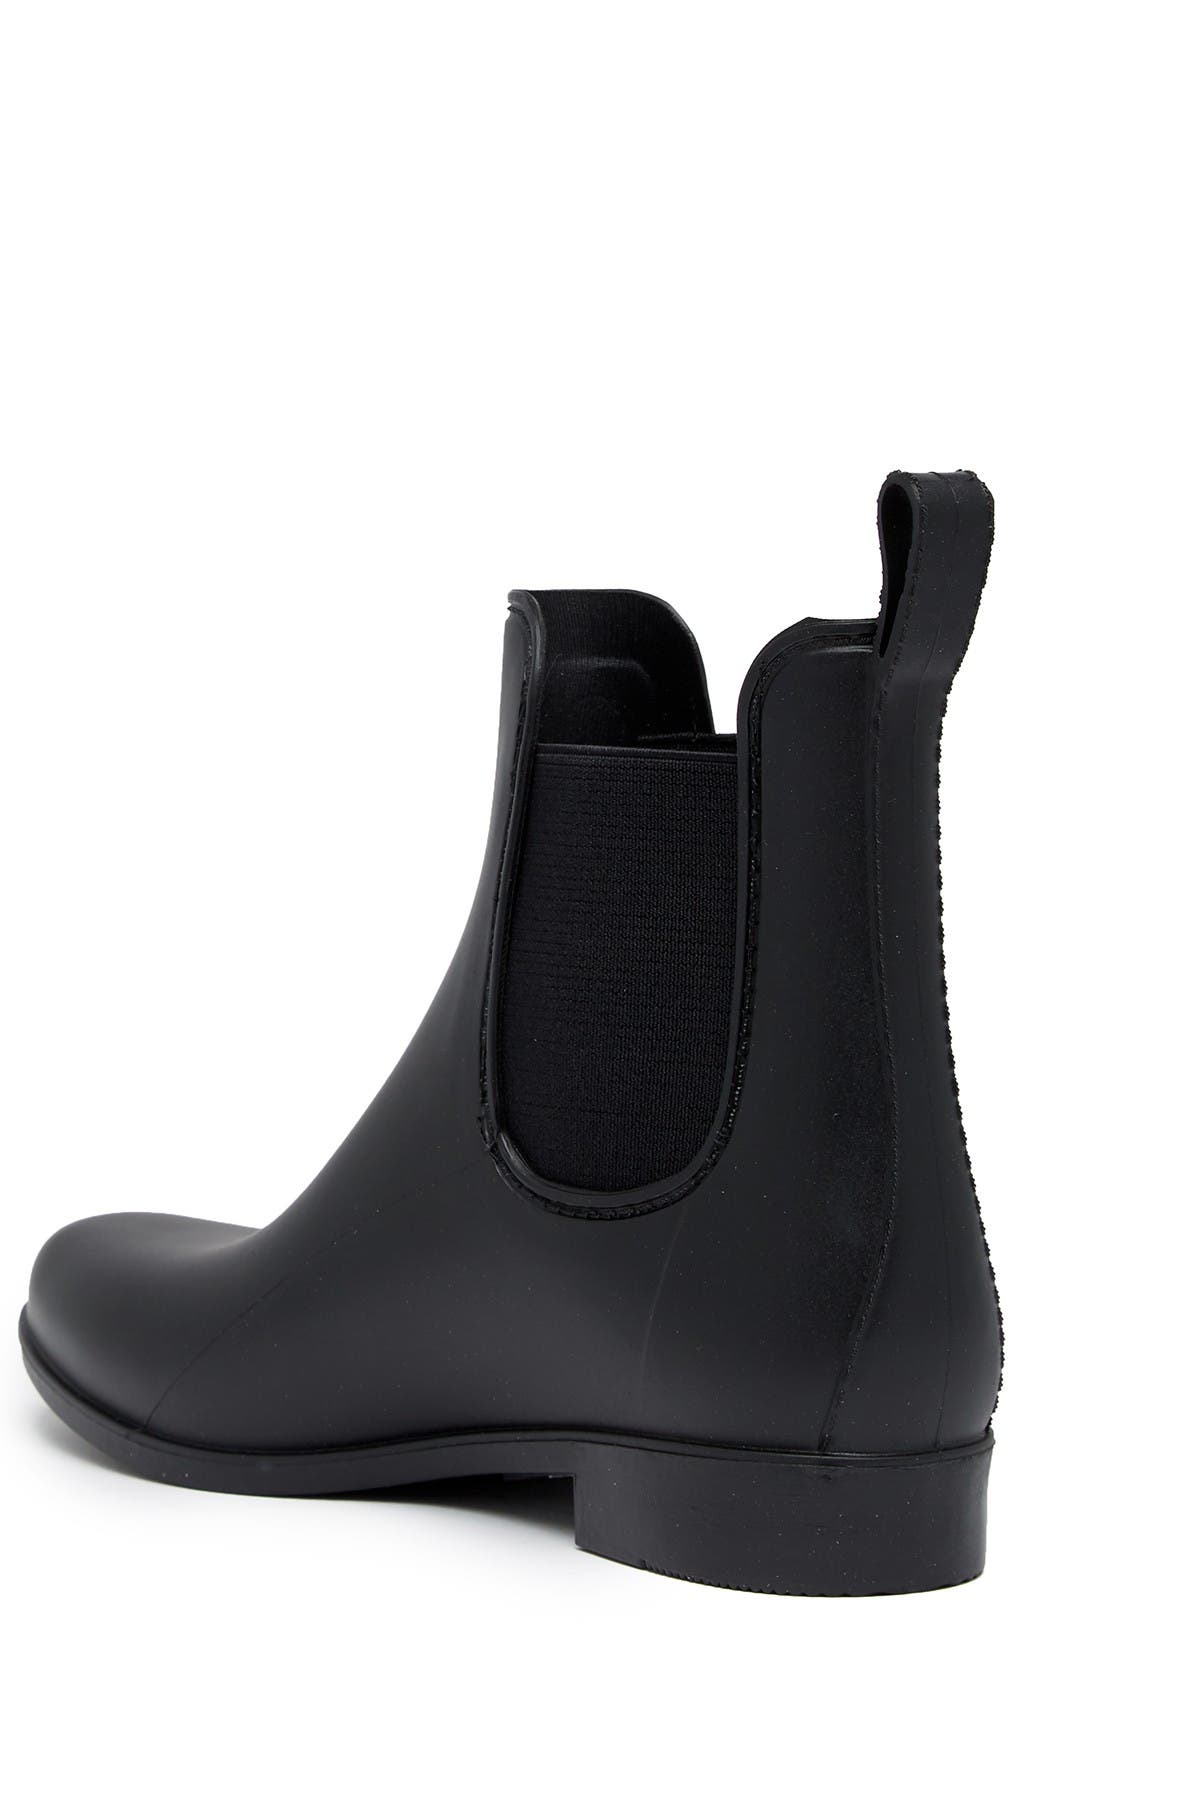 storm by cougar chelsea rain boots